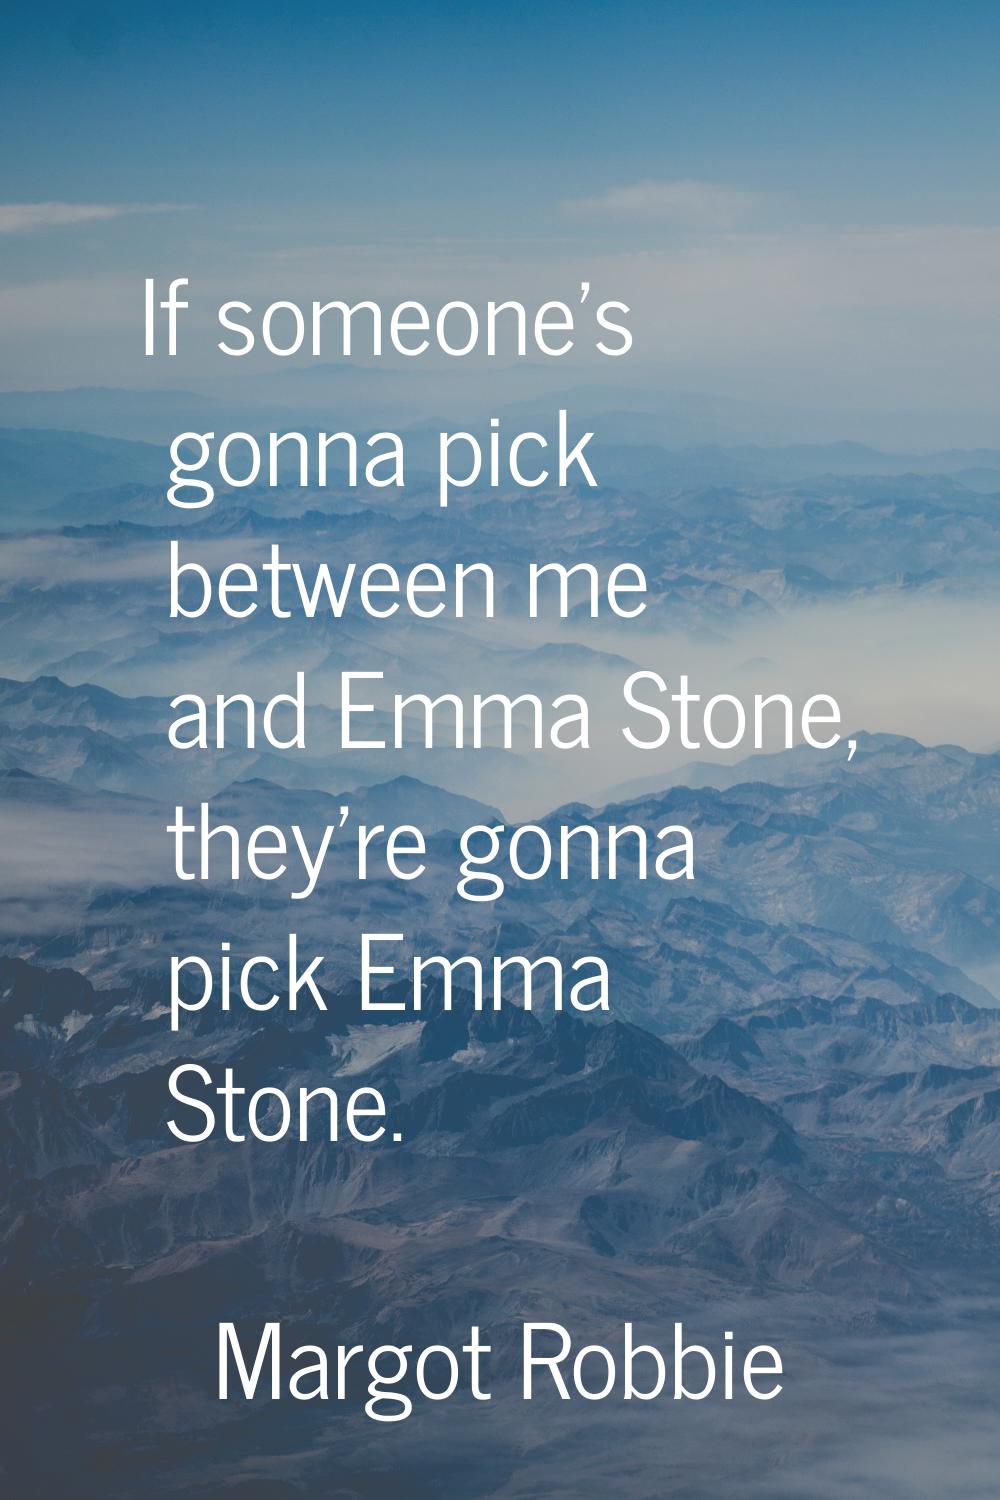 If someone's gonna pick between me and Emma Stone, they're gonna pick Emma Stone.